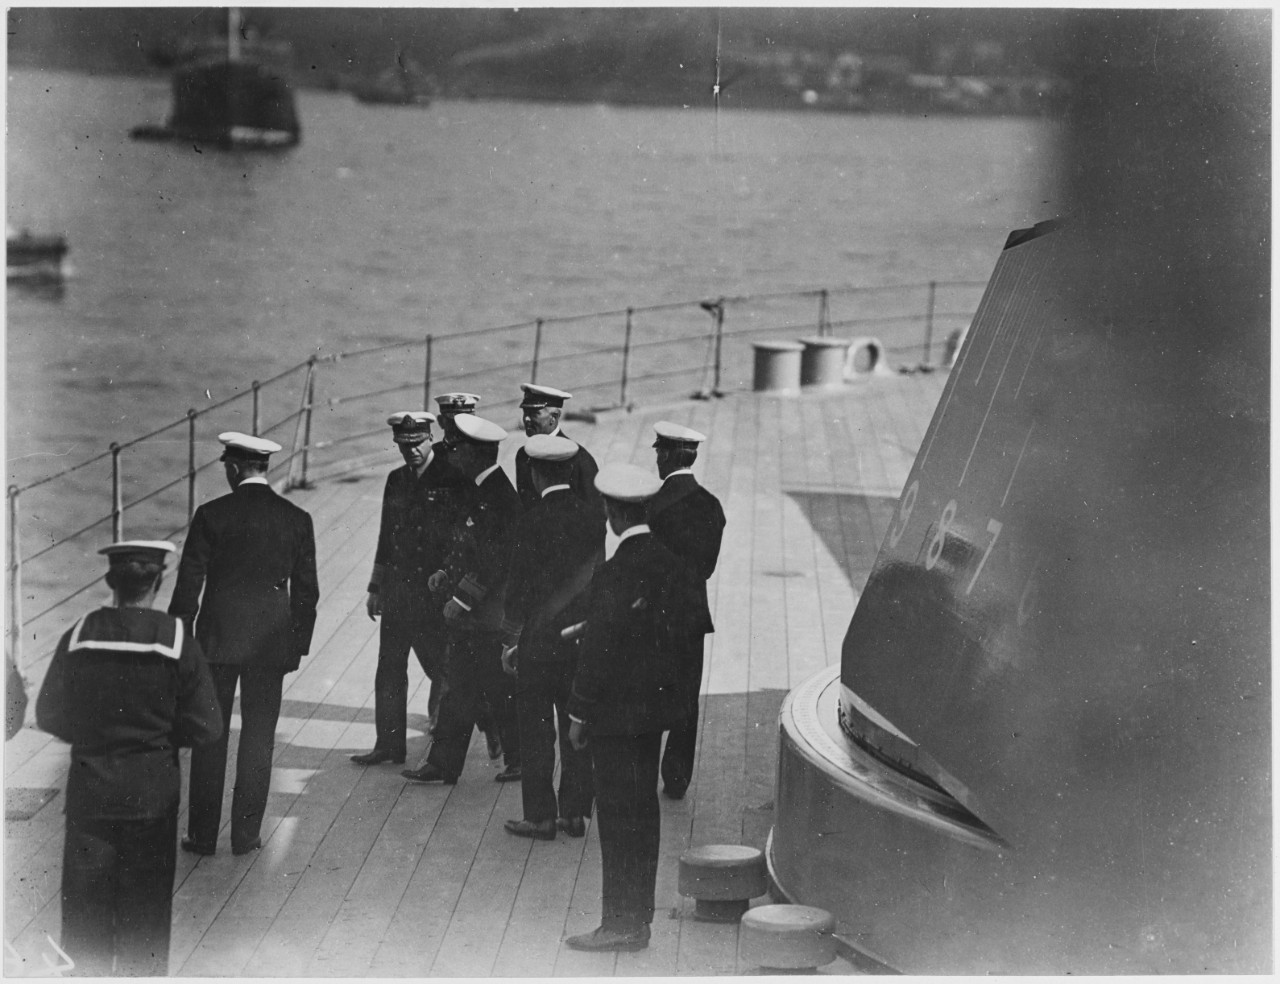 Photograph on deck of ship